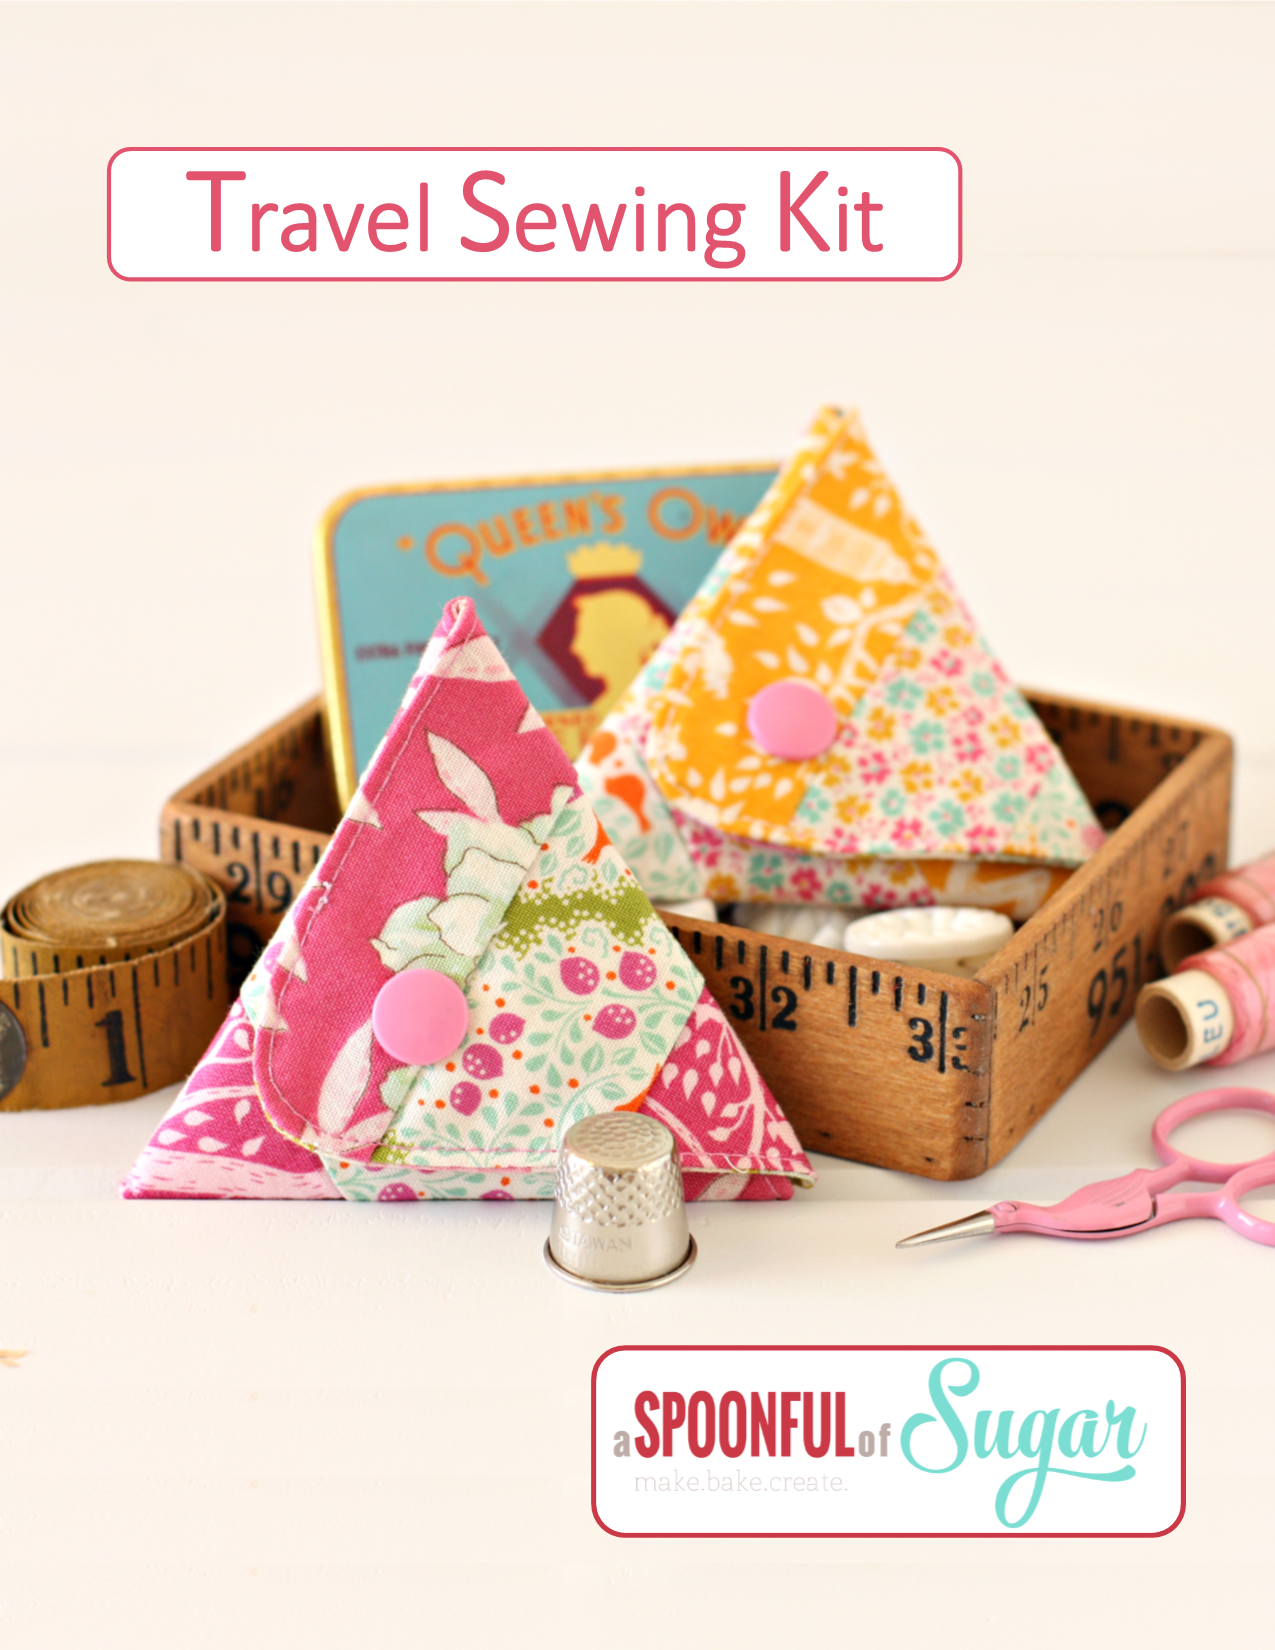 Sewing Travel Kit made from a Clutch - WeAllSew